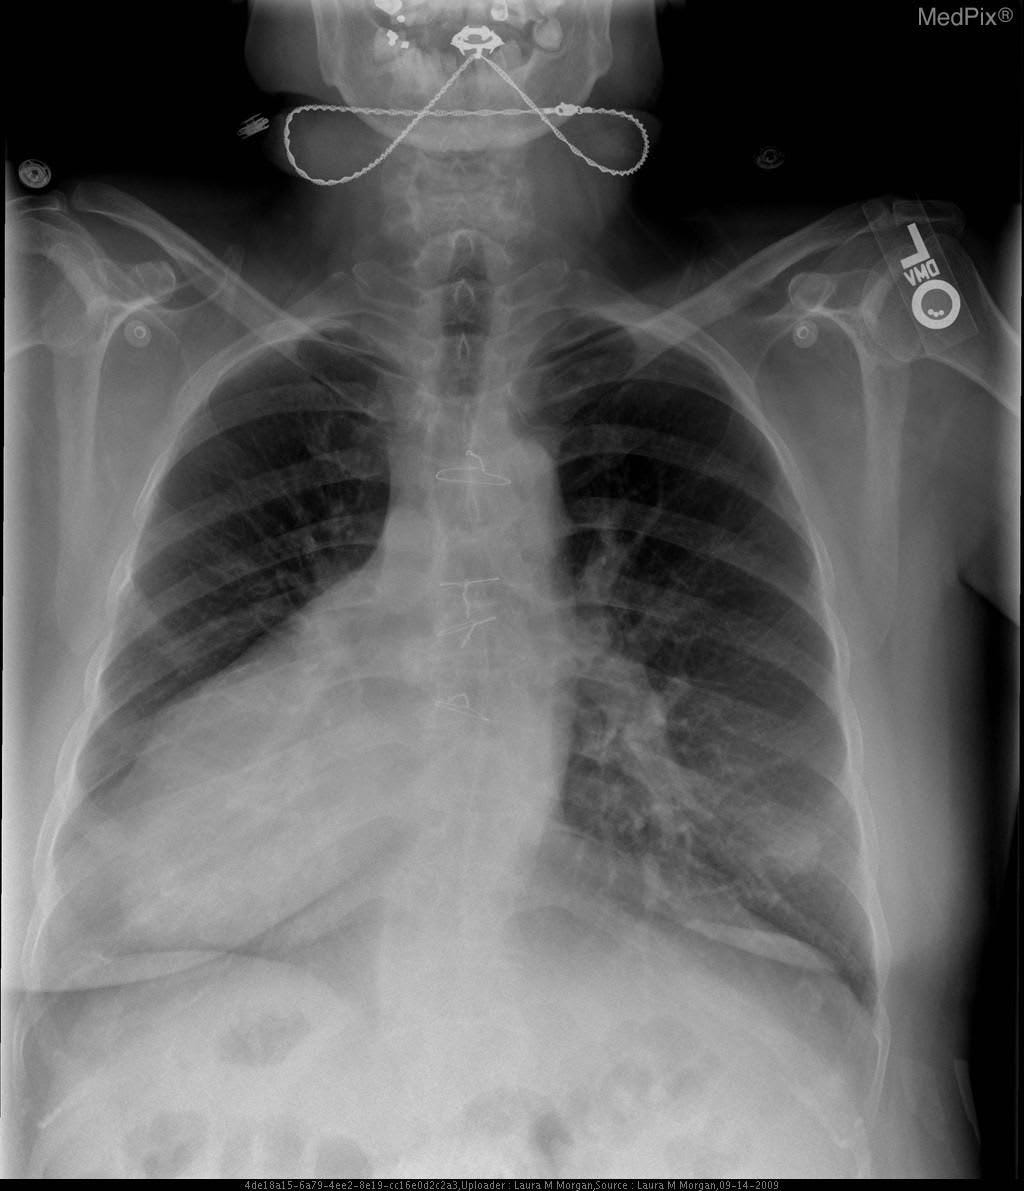 Posterior-Anterior X-ray with situs inversus with dextrocardia